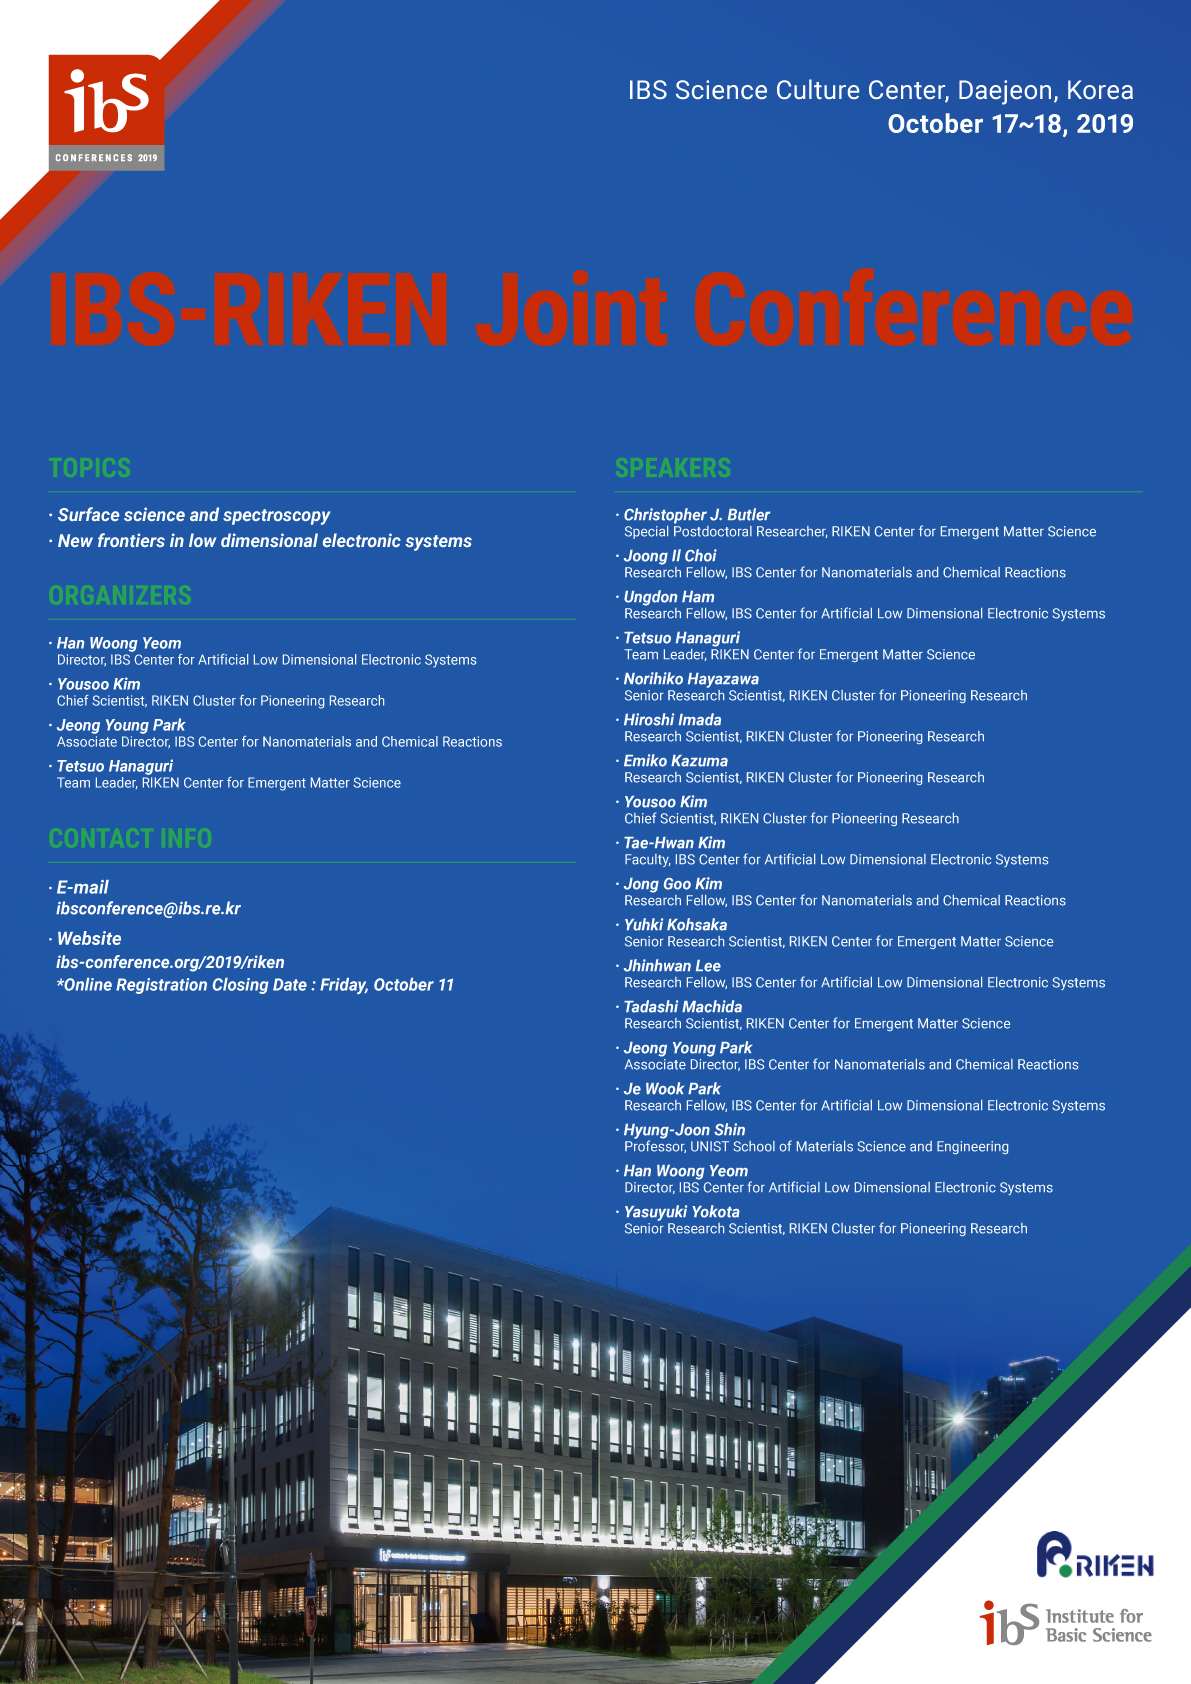 IBS-RIKEN Joint Conference(Oct 17-18, IBS Science Culture Center) 사진